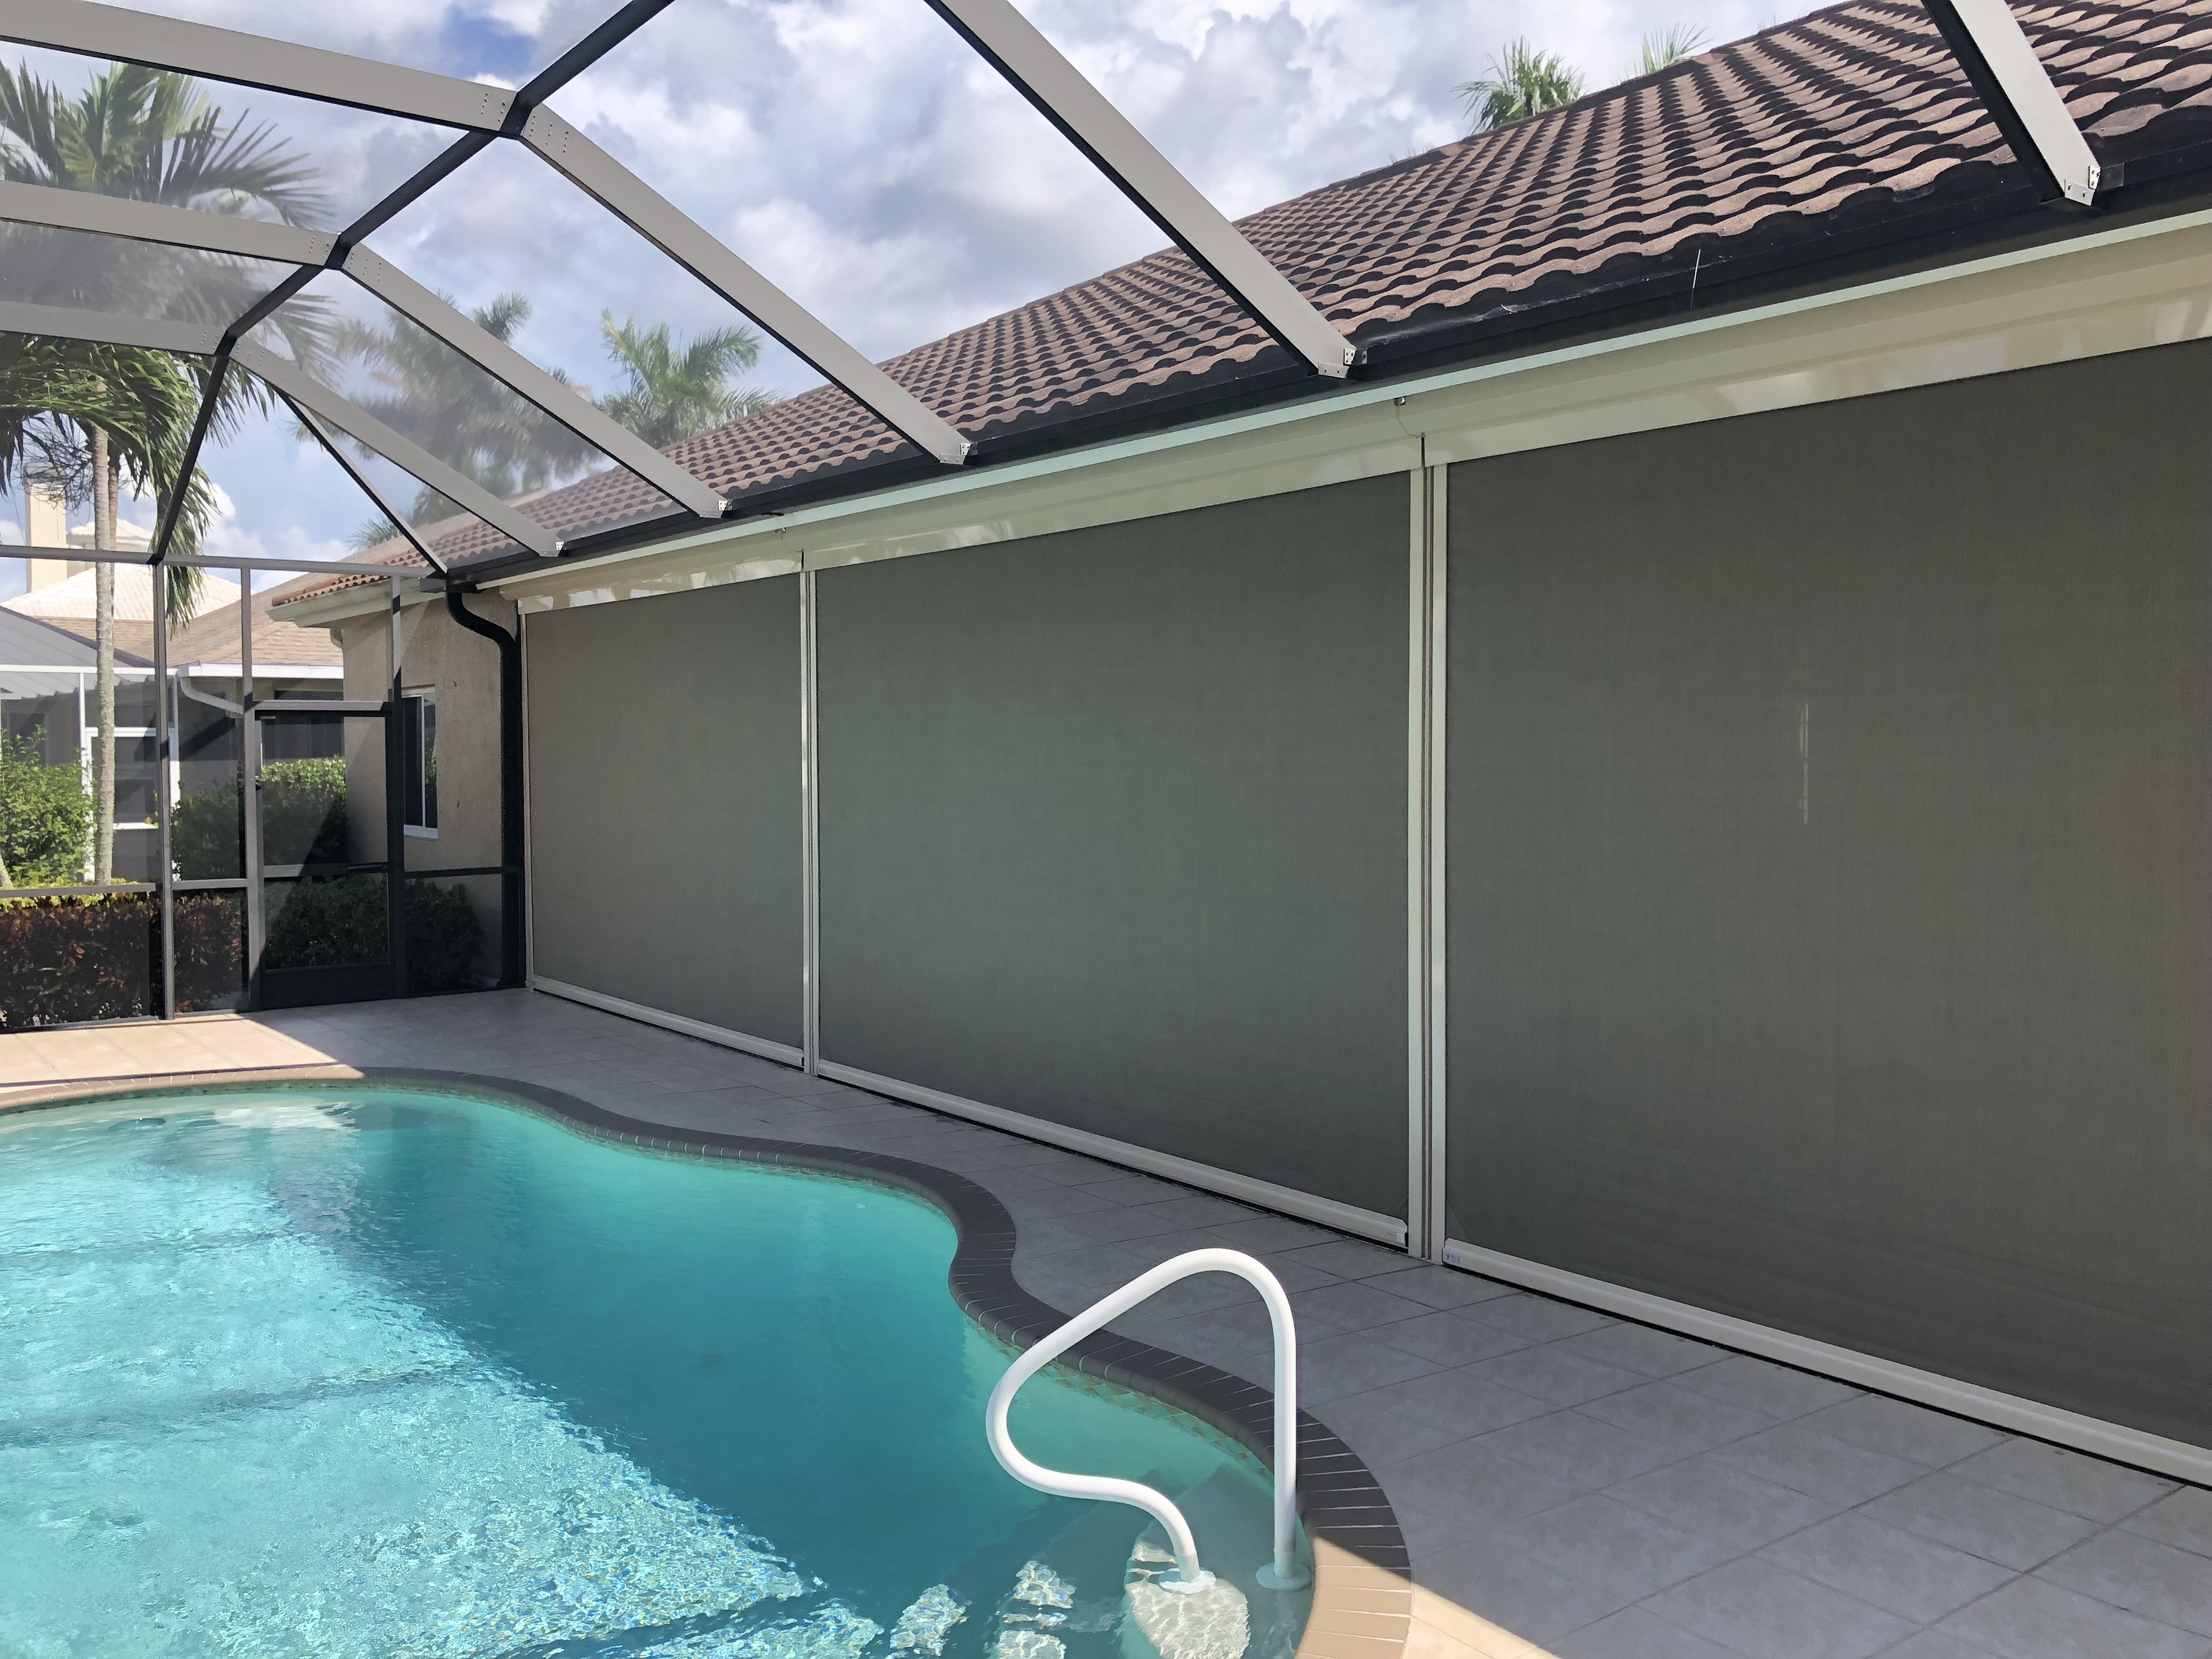 line of hurricane screens by pool - hurricane screen installation concept image